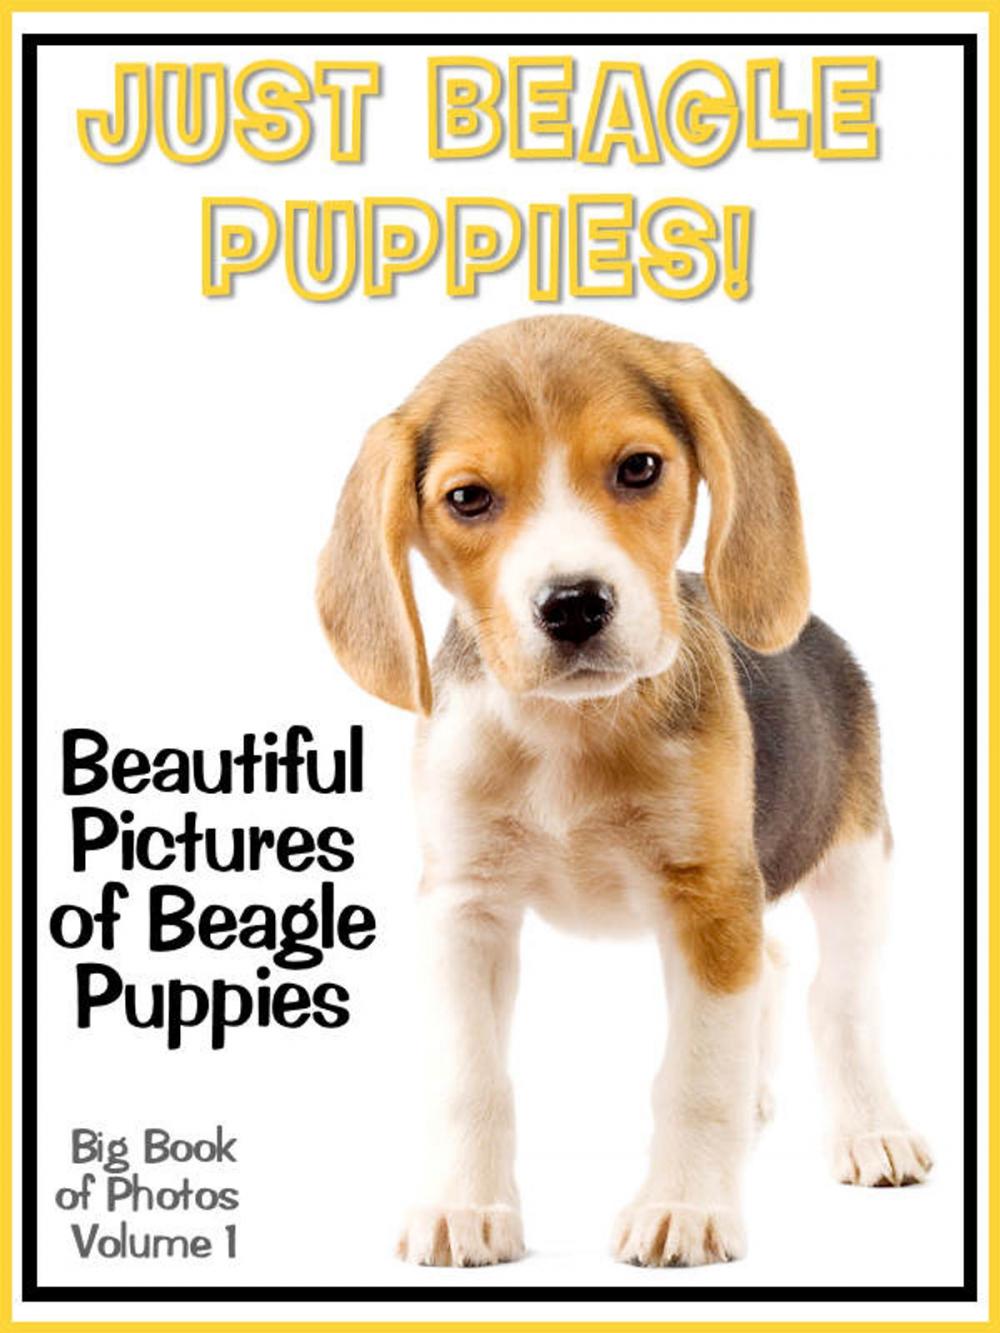 Big bigCover of Just Beagle Puppy Photos! Big Book of Beagle Puppies Photographs & Adorable Pictures, Vol. 1